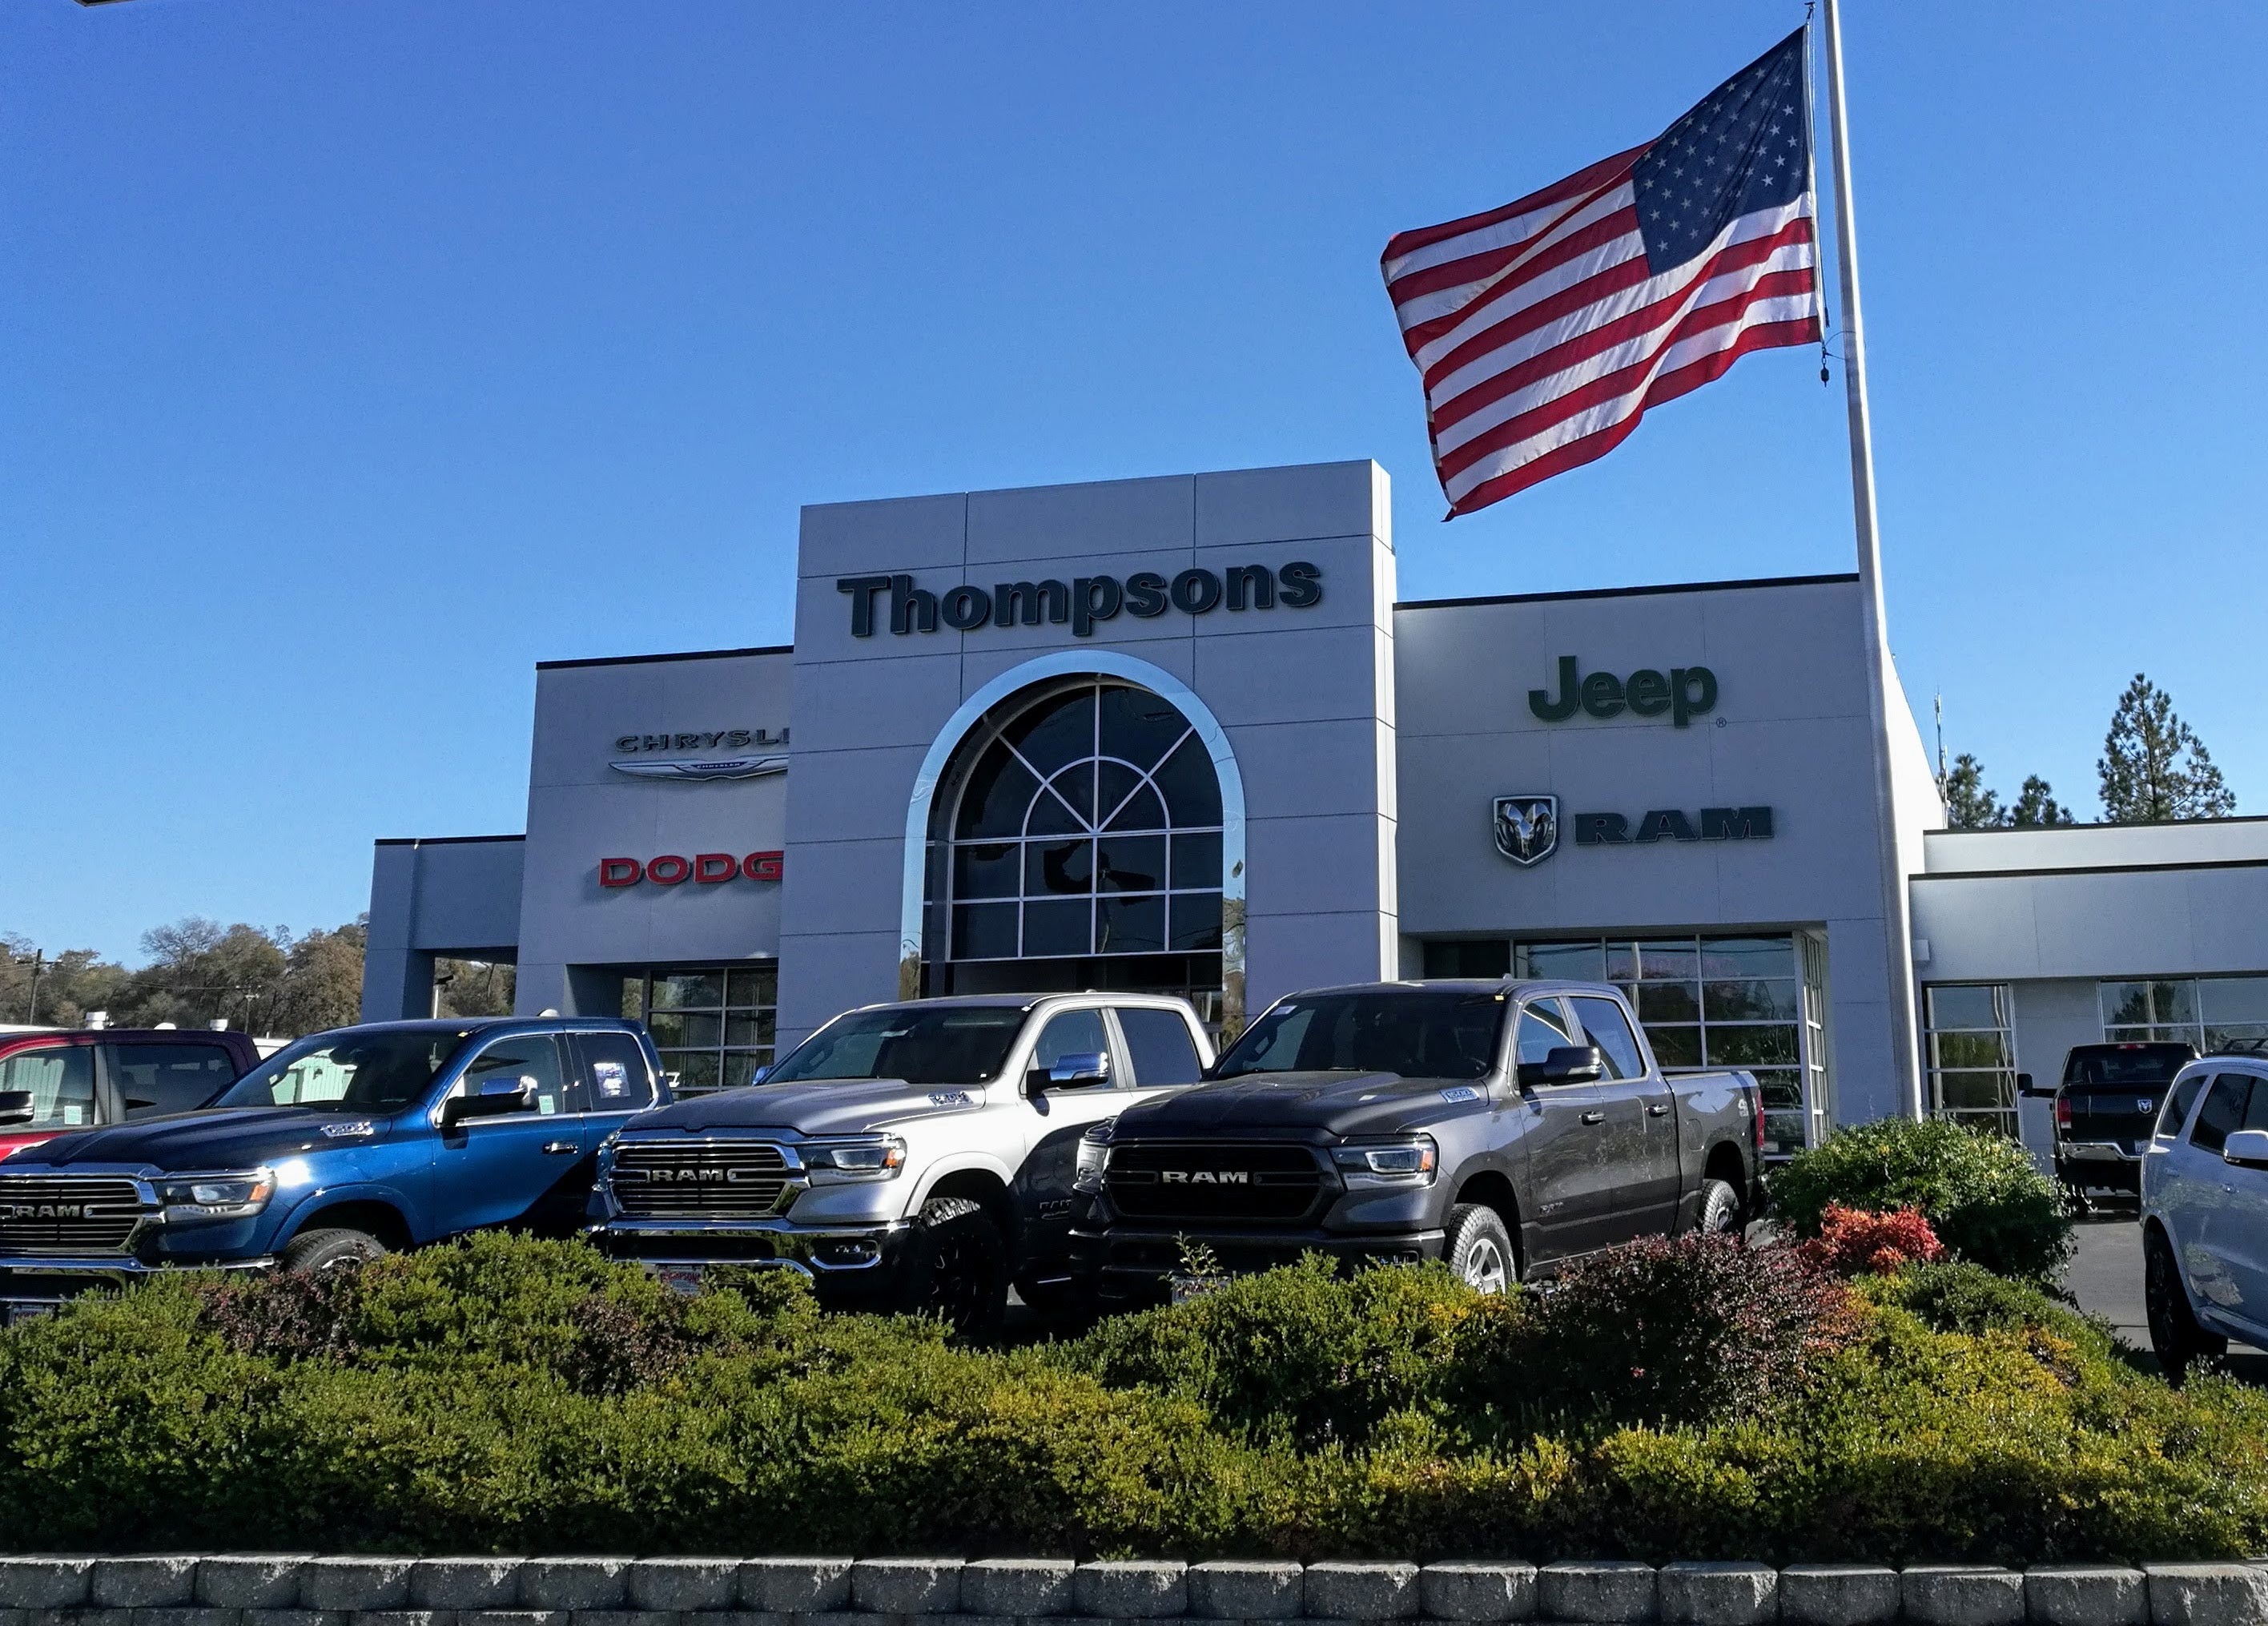 Search jobs at Thompsons Auto Group